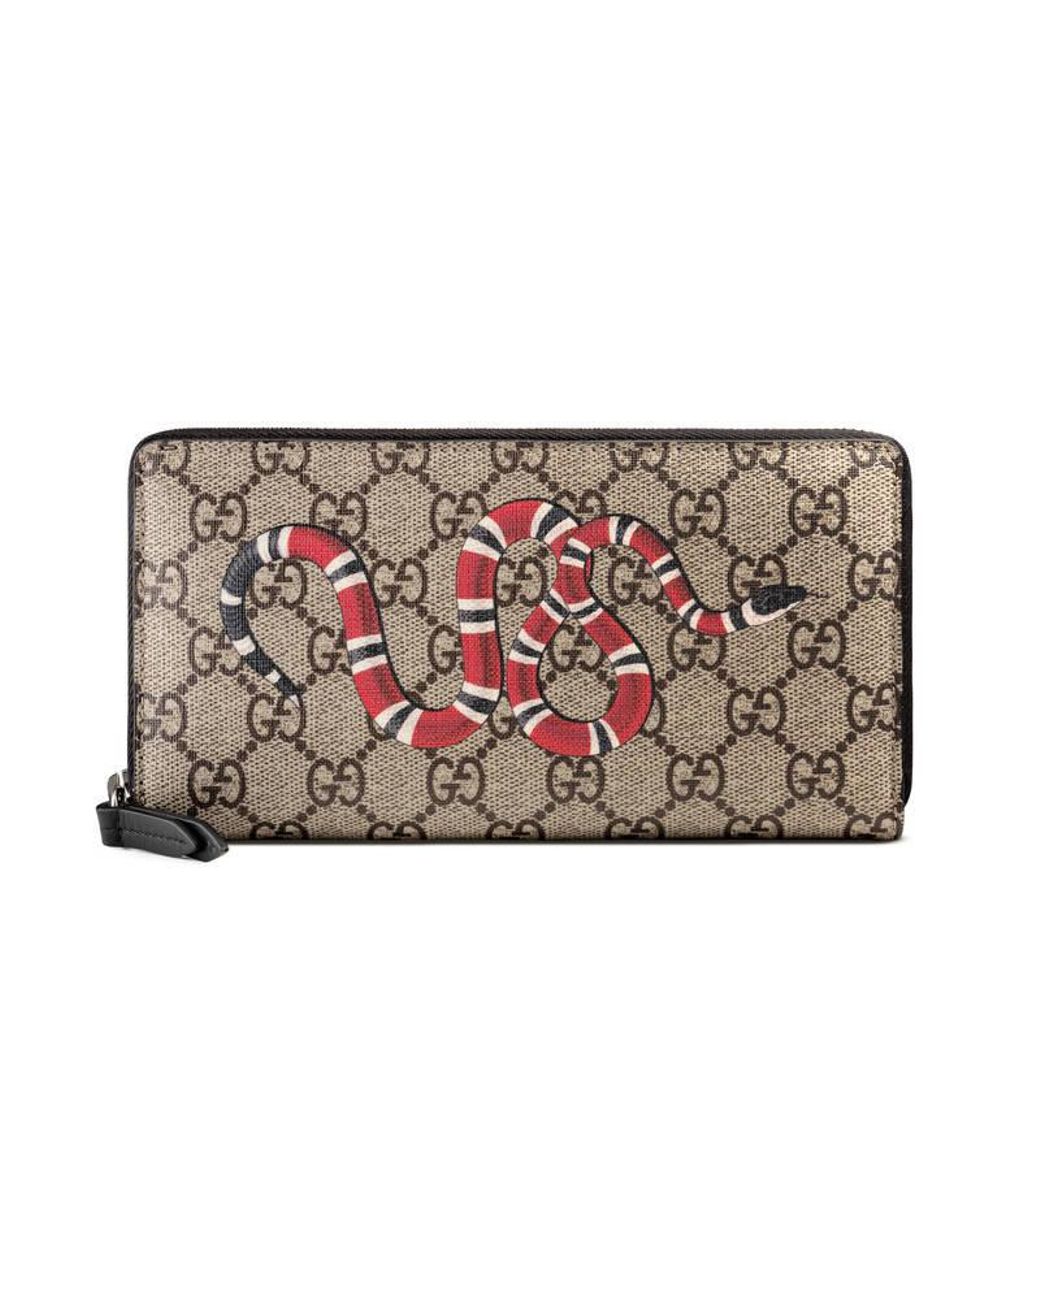 GUCCI SUPREME WALLET for Sale in Peck Slip, NY - OfferUp